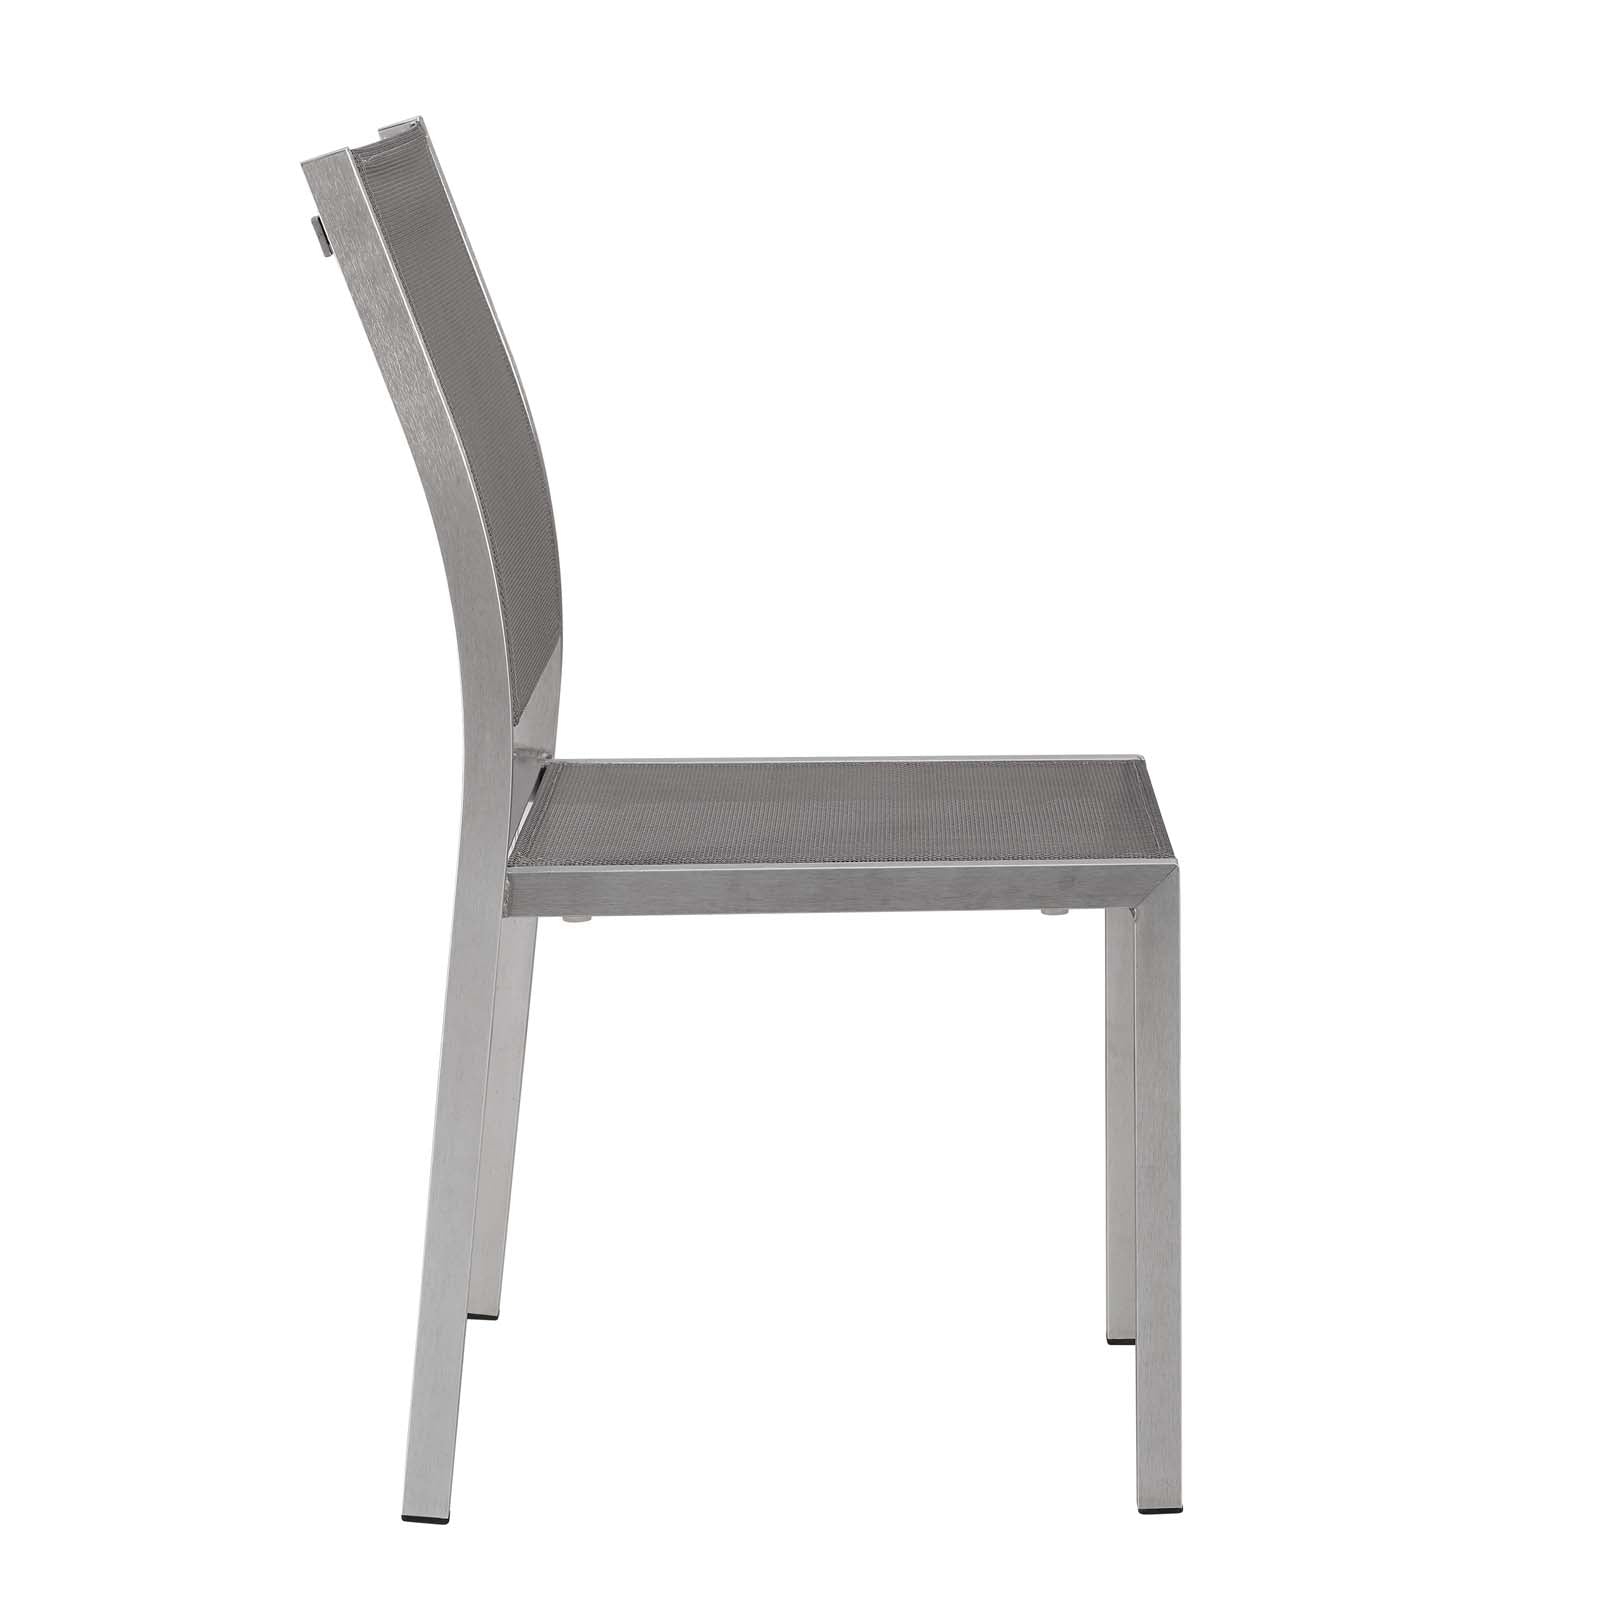 Modway Outdoor Dining Chairs - Shore Side Chair Outdoor Patio Aluminum Set of 2 Silver Gray